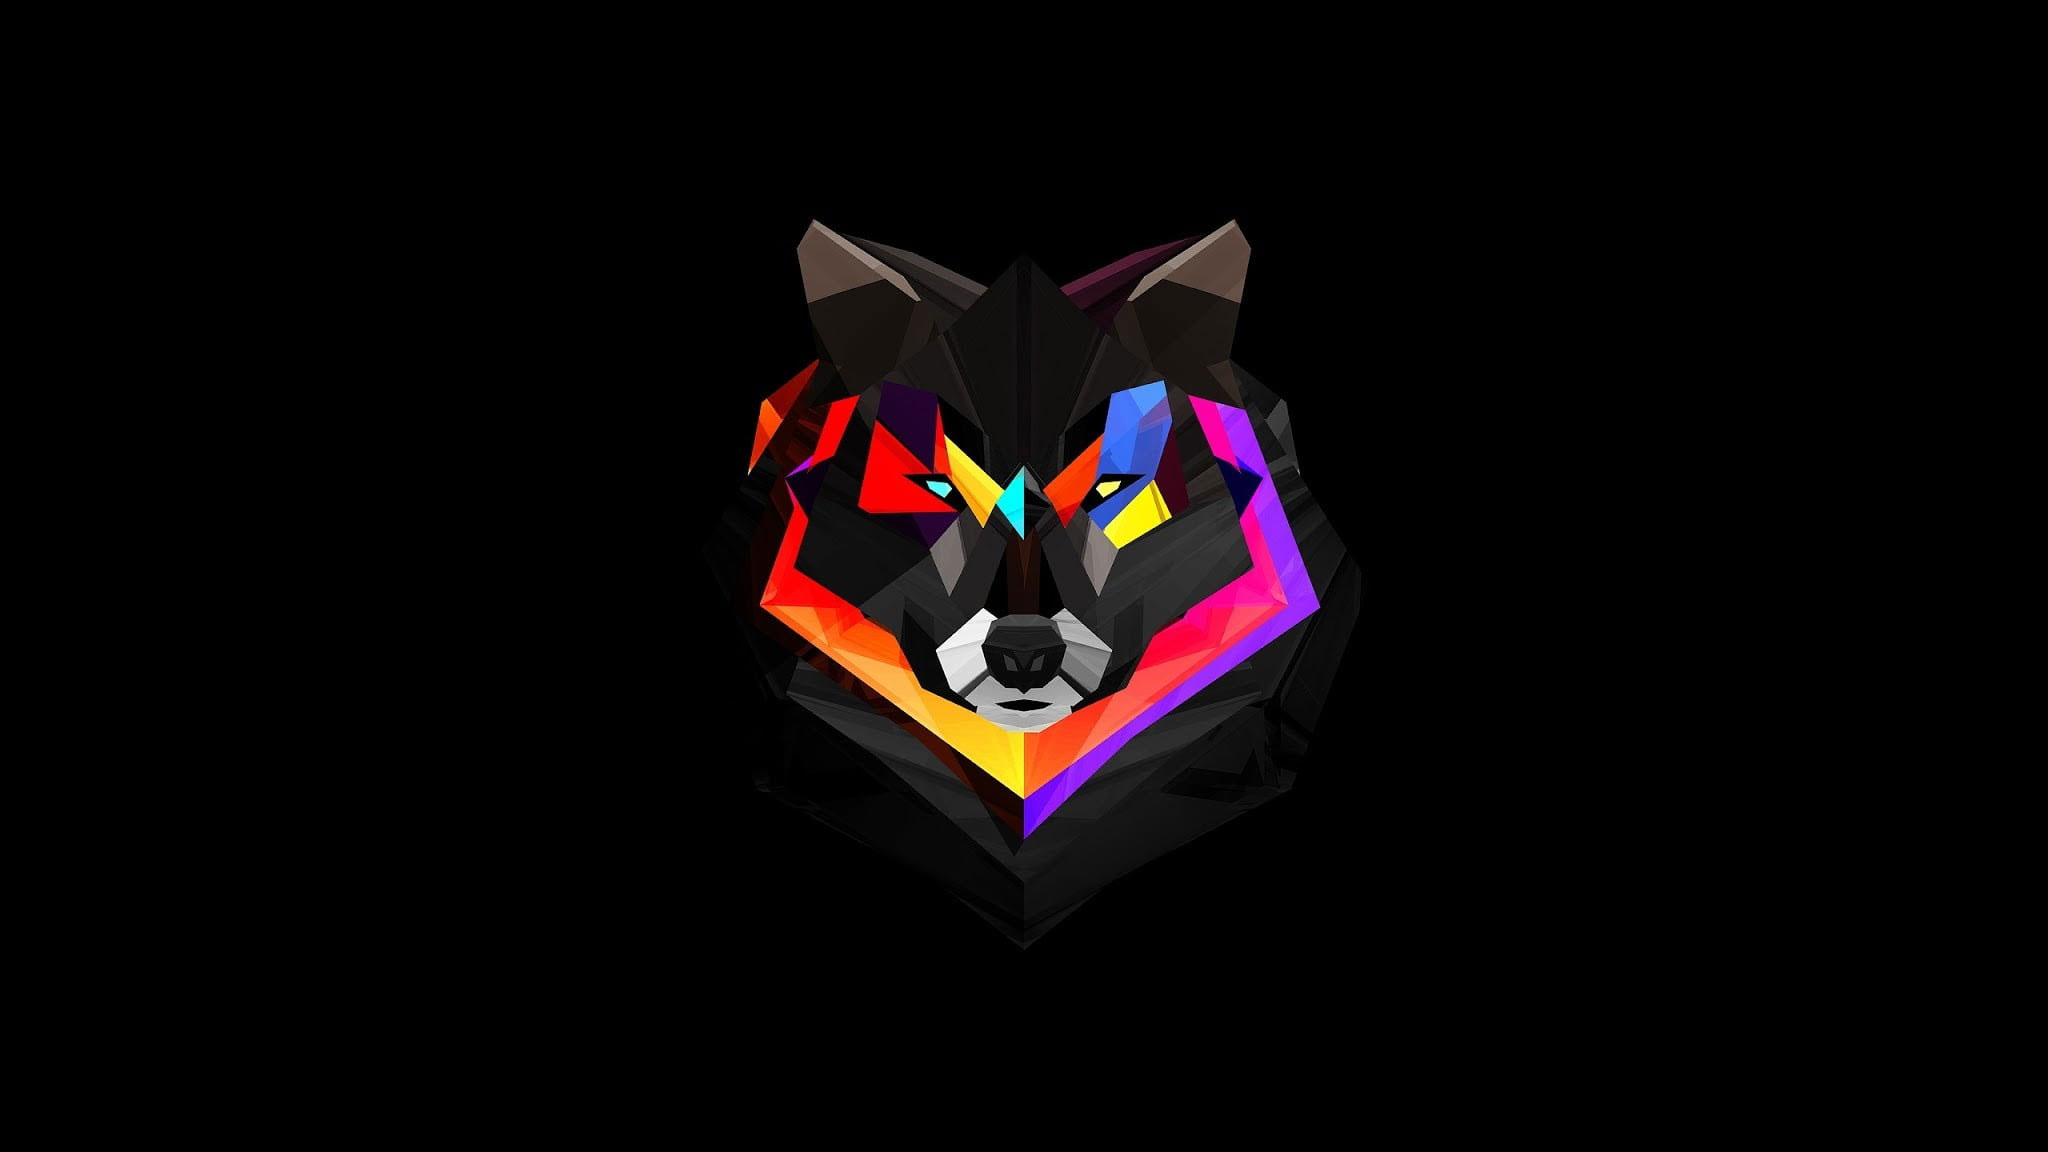 Red-brown and purple wolf vector art wallpaper, low poly, black background